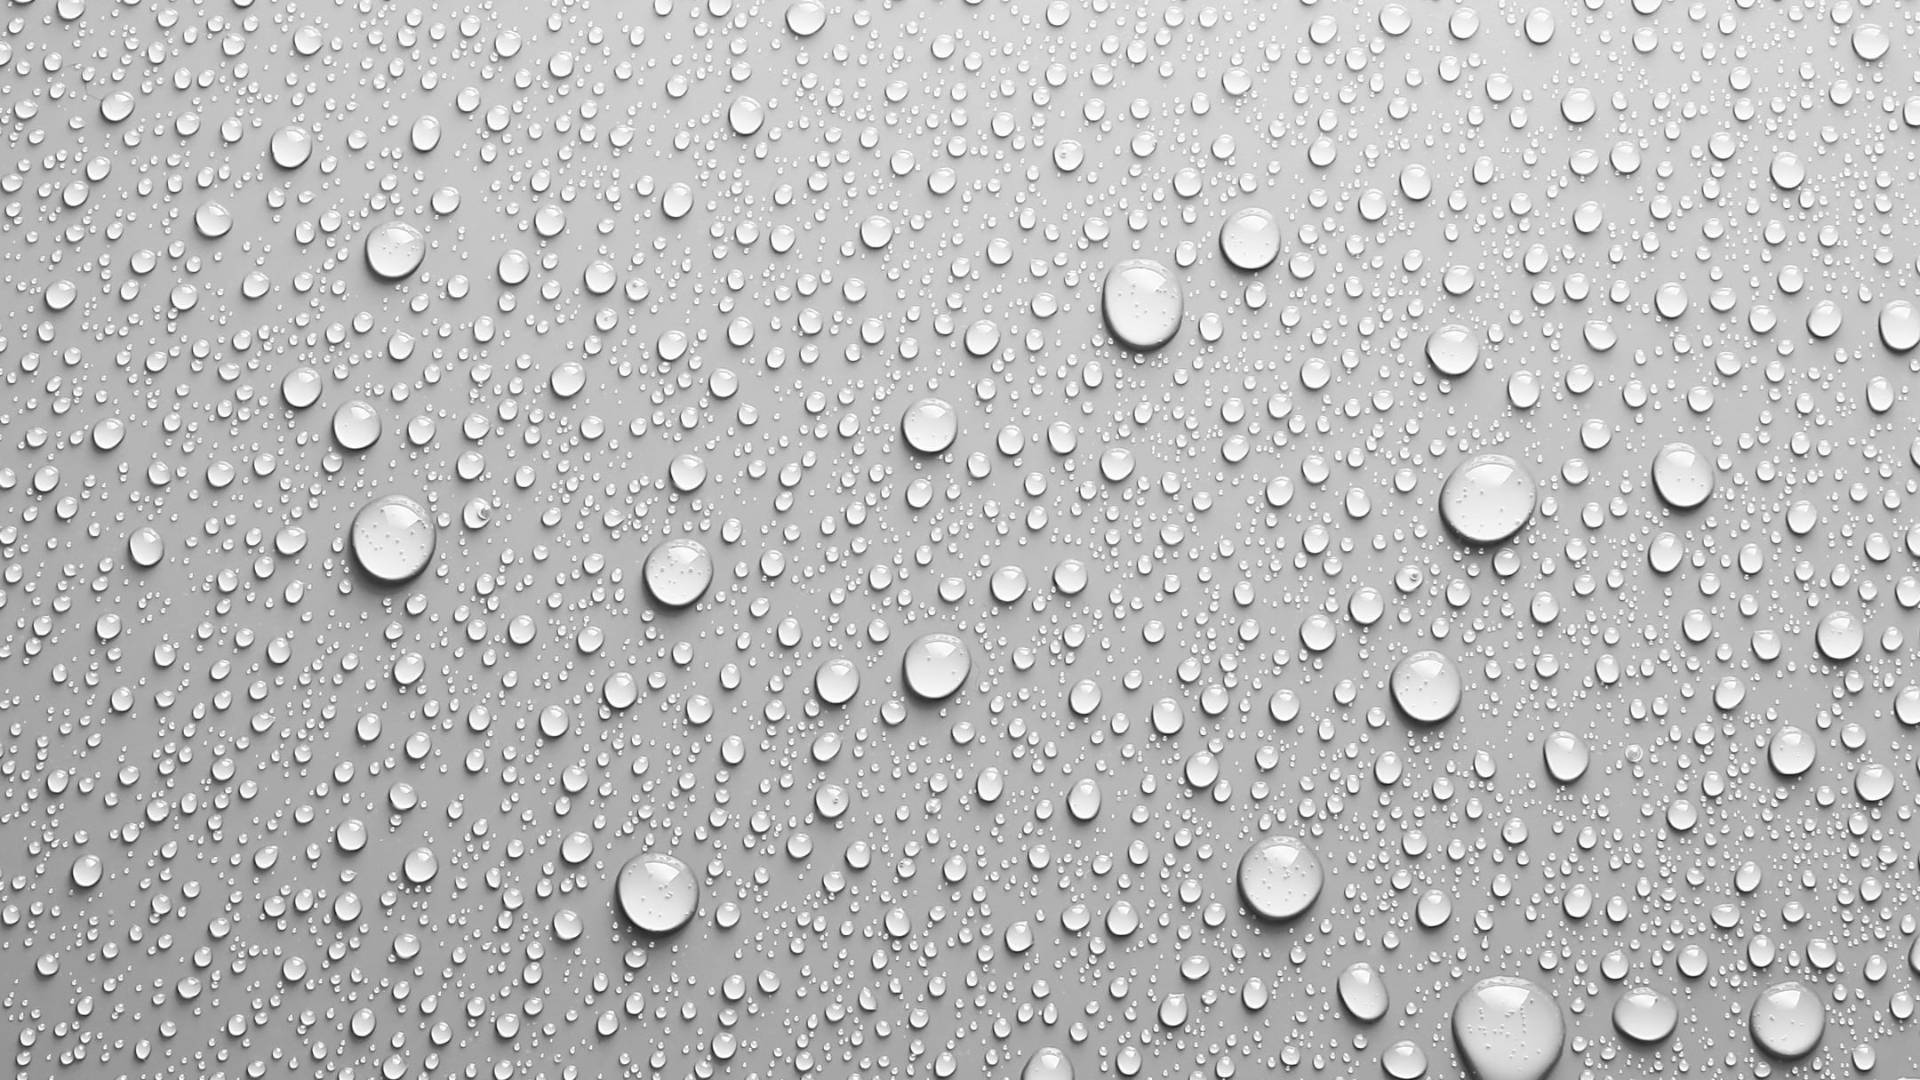 Gmail Water Droplets Background